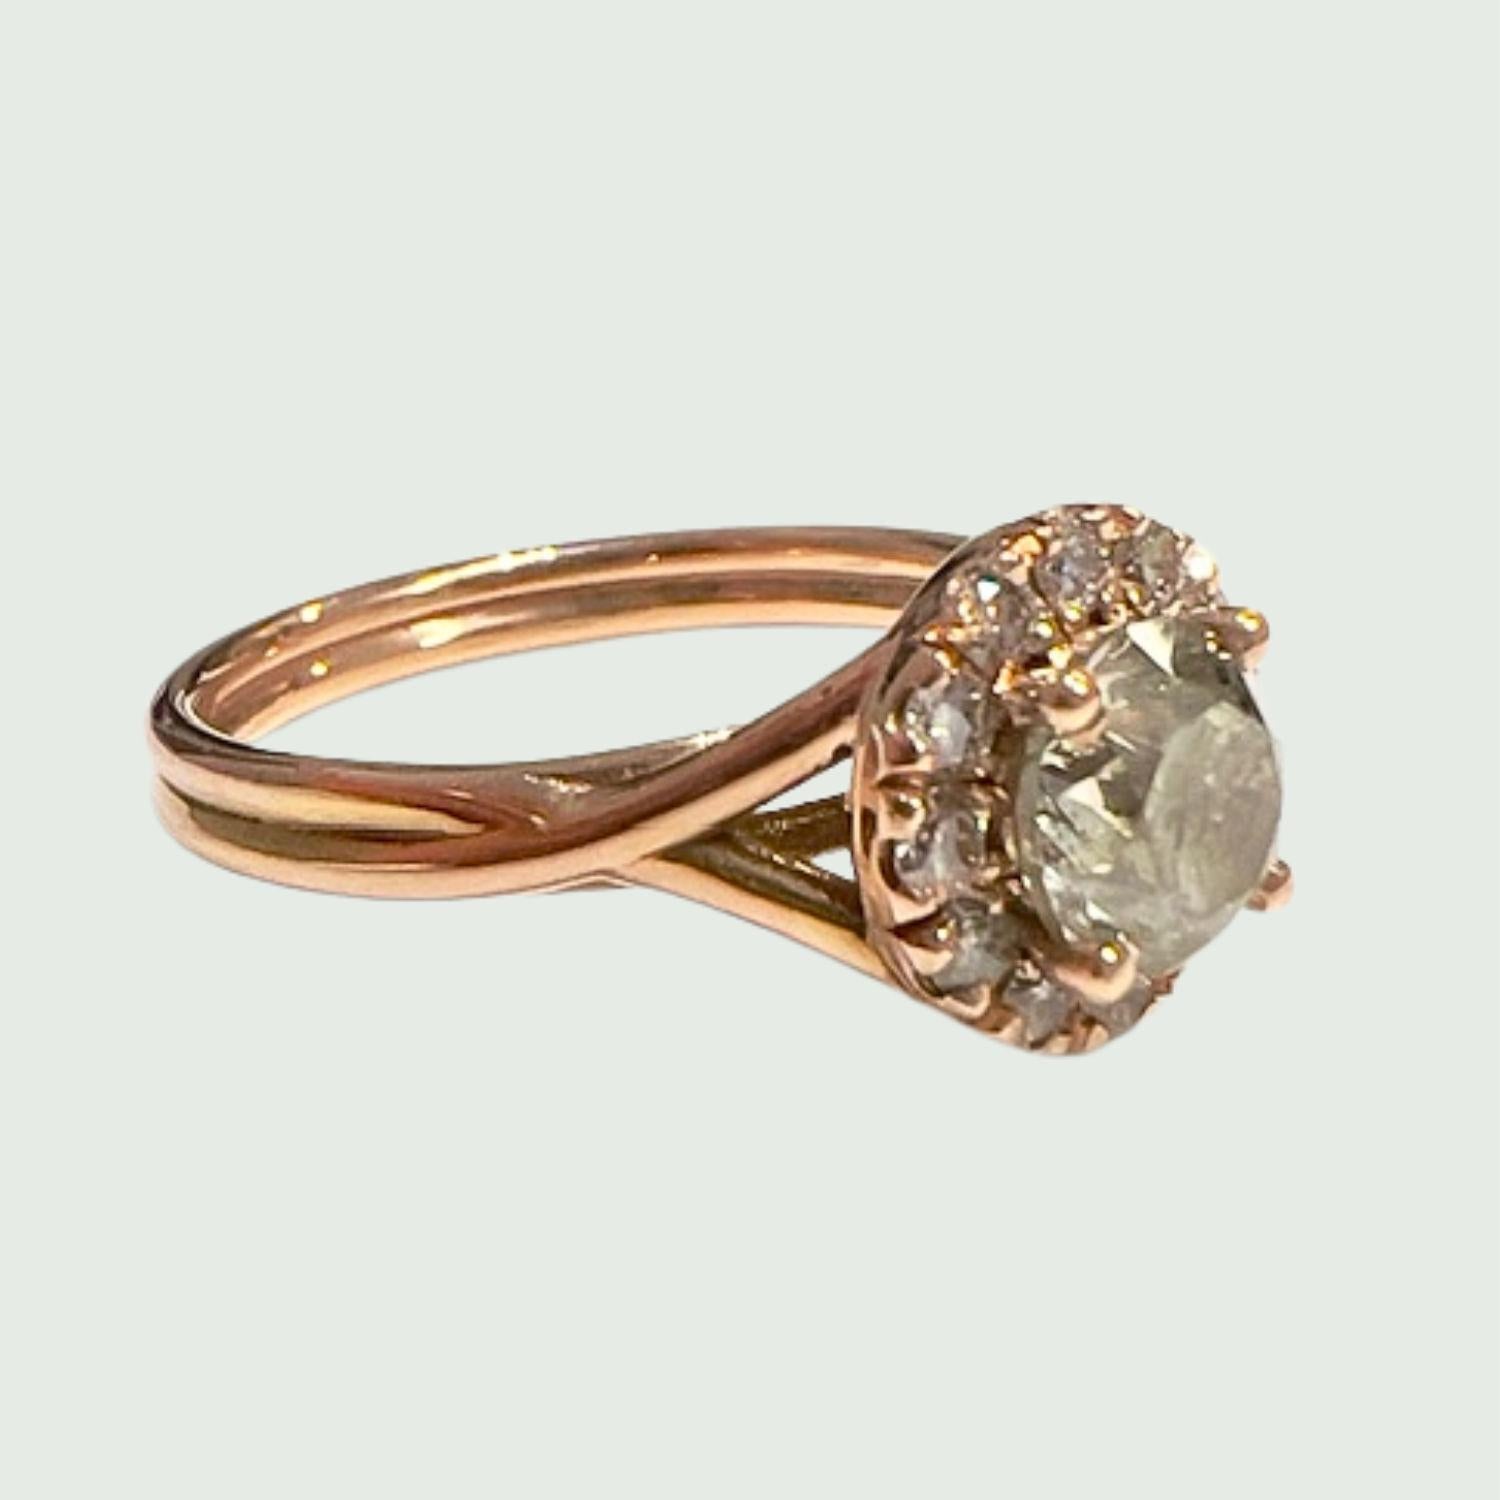 Discover the Contemporary Design Ring that will captivate all hearts. This elegant ring is crafted with exquisite 18-karat yellow gold and features a dazzling  brilliant-cut diamond of 0.80 carats, complemented at its center by diamonds of 0.22